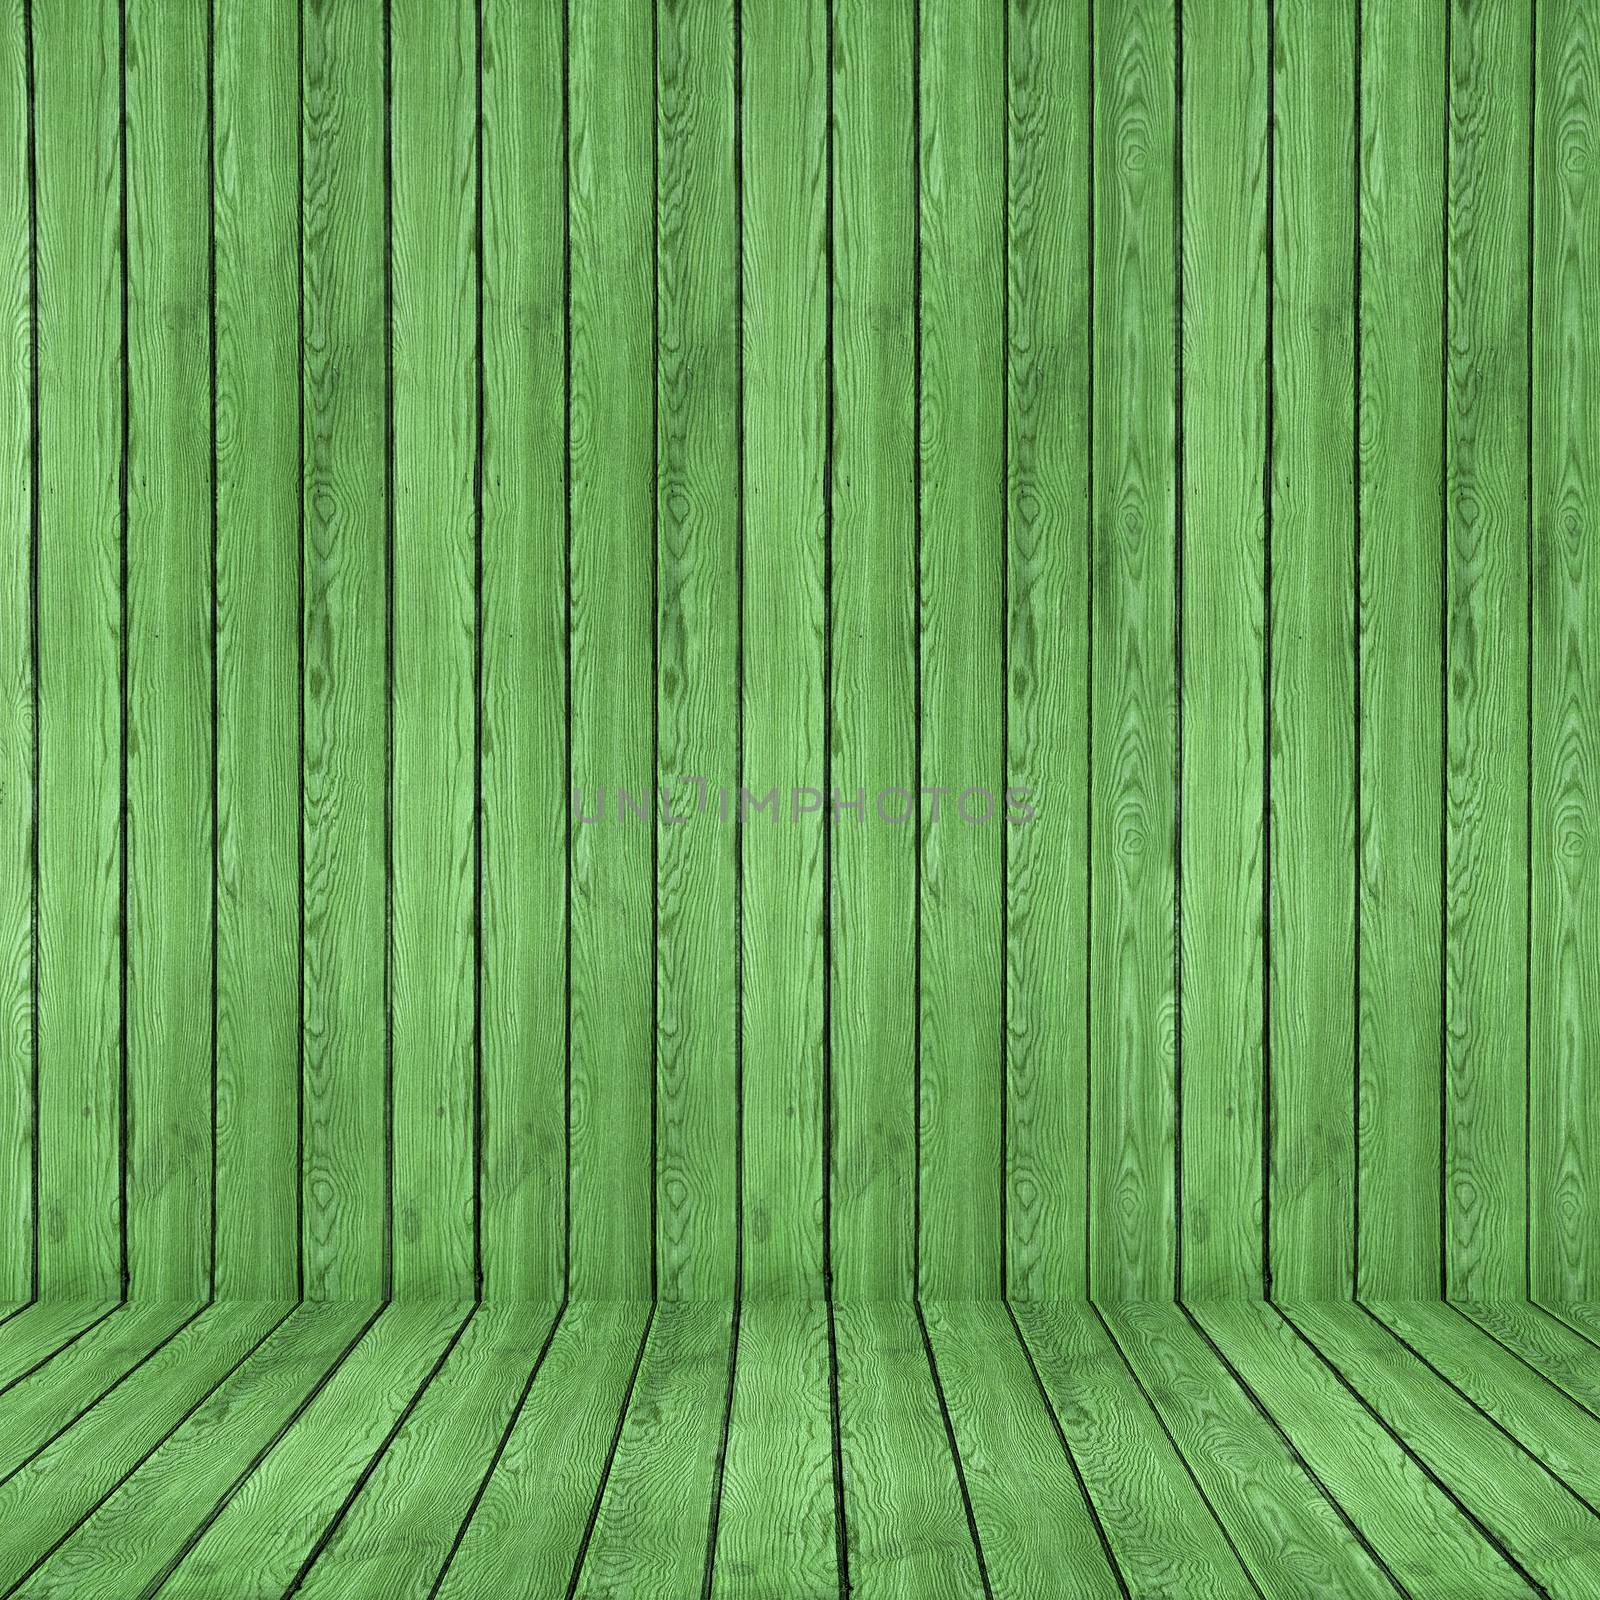 Wood texture background. green wood wall and floor by ivo_13